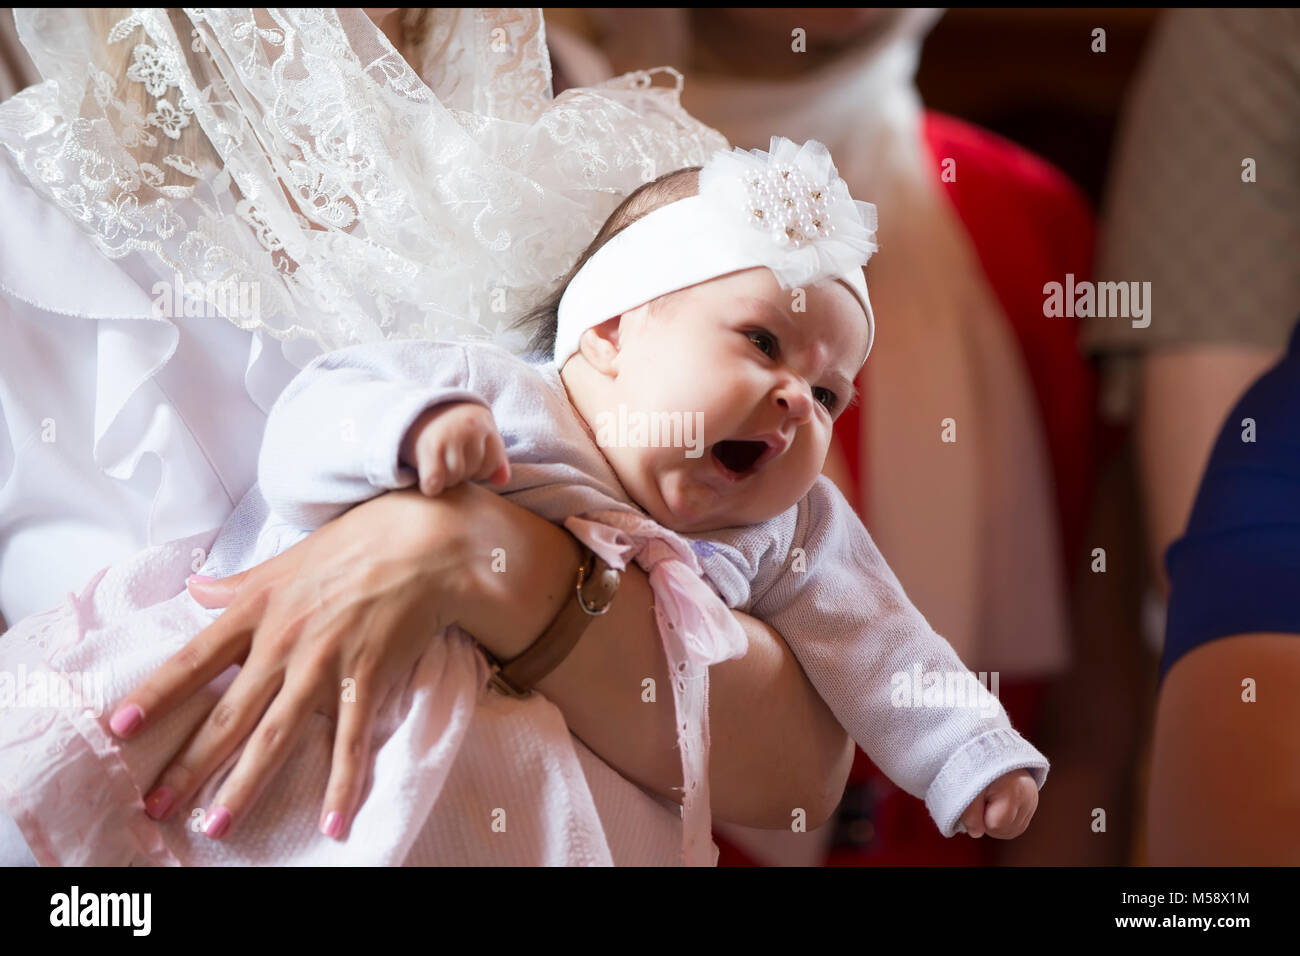 Belarus, the city of Gomel. June 10, 2017. Church at the regional hospital. The baptism of a child.A baby child yawns in his arms at the rite of bapti Stock Photo